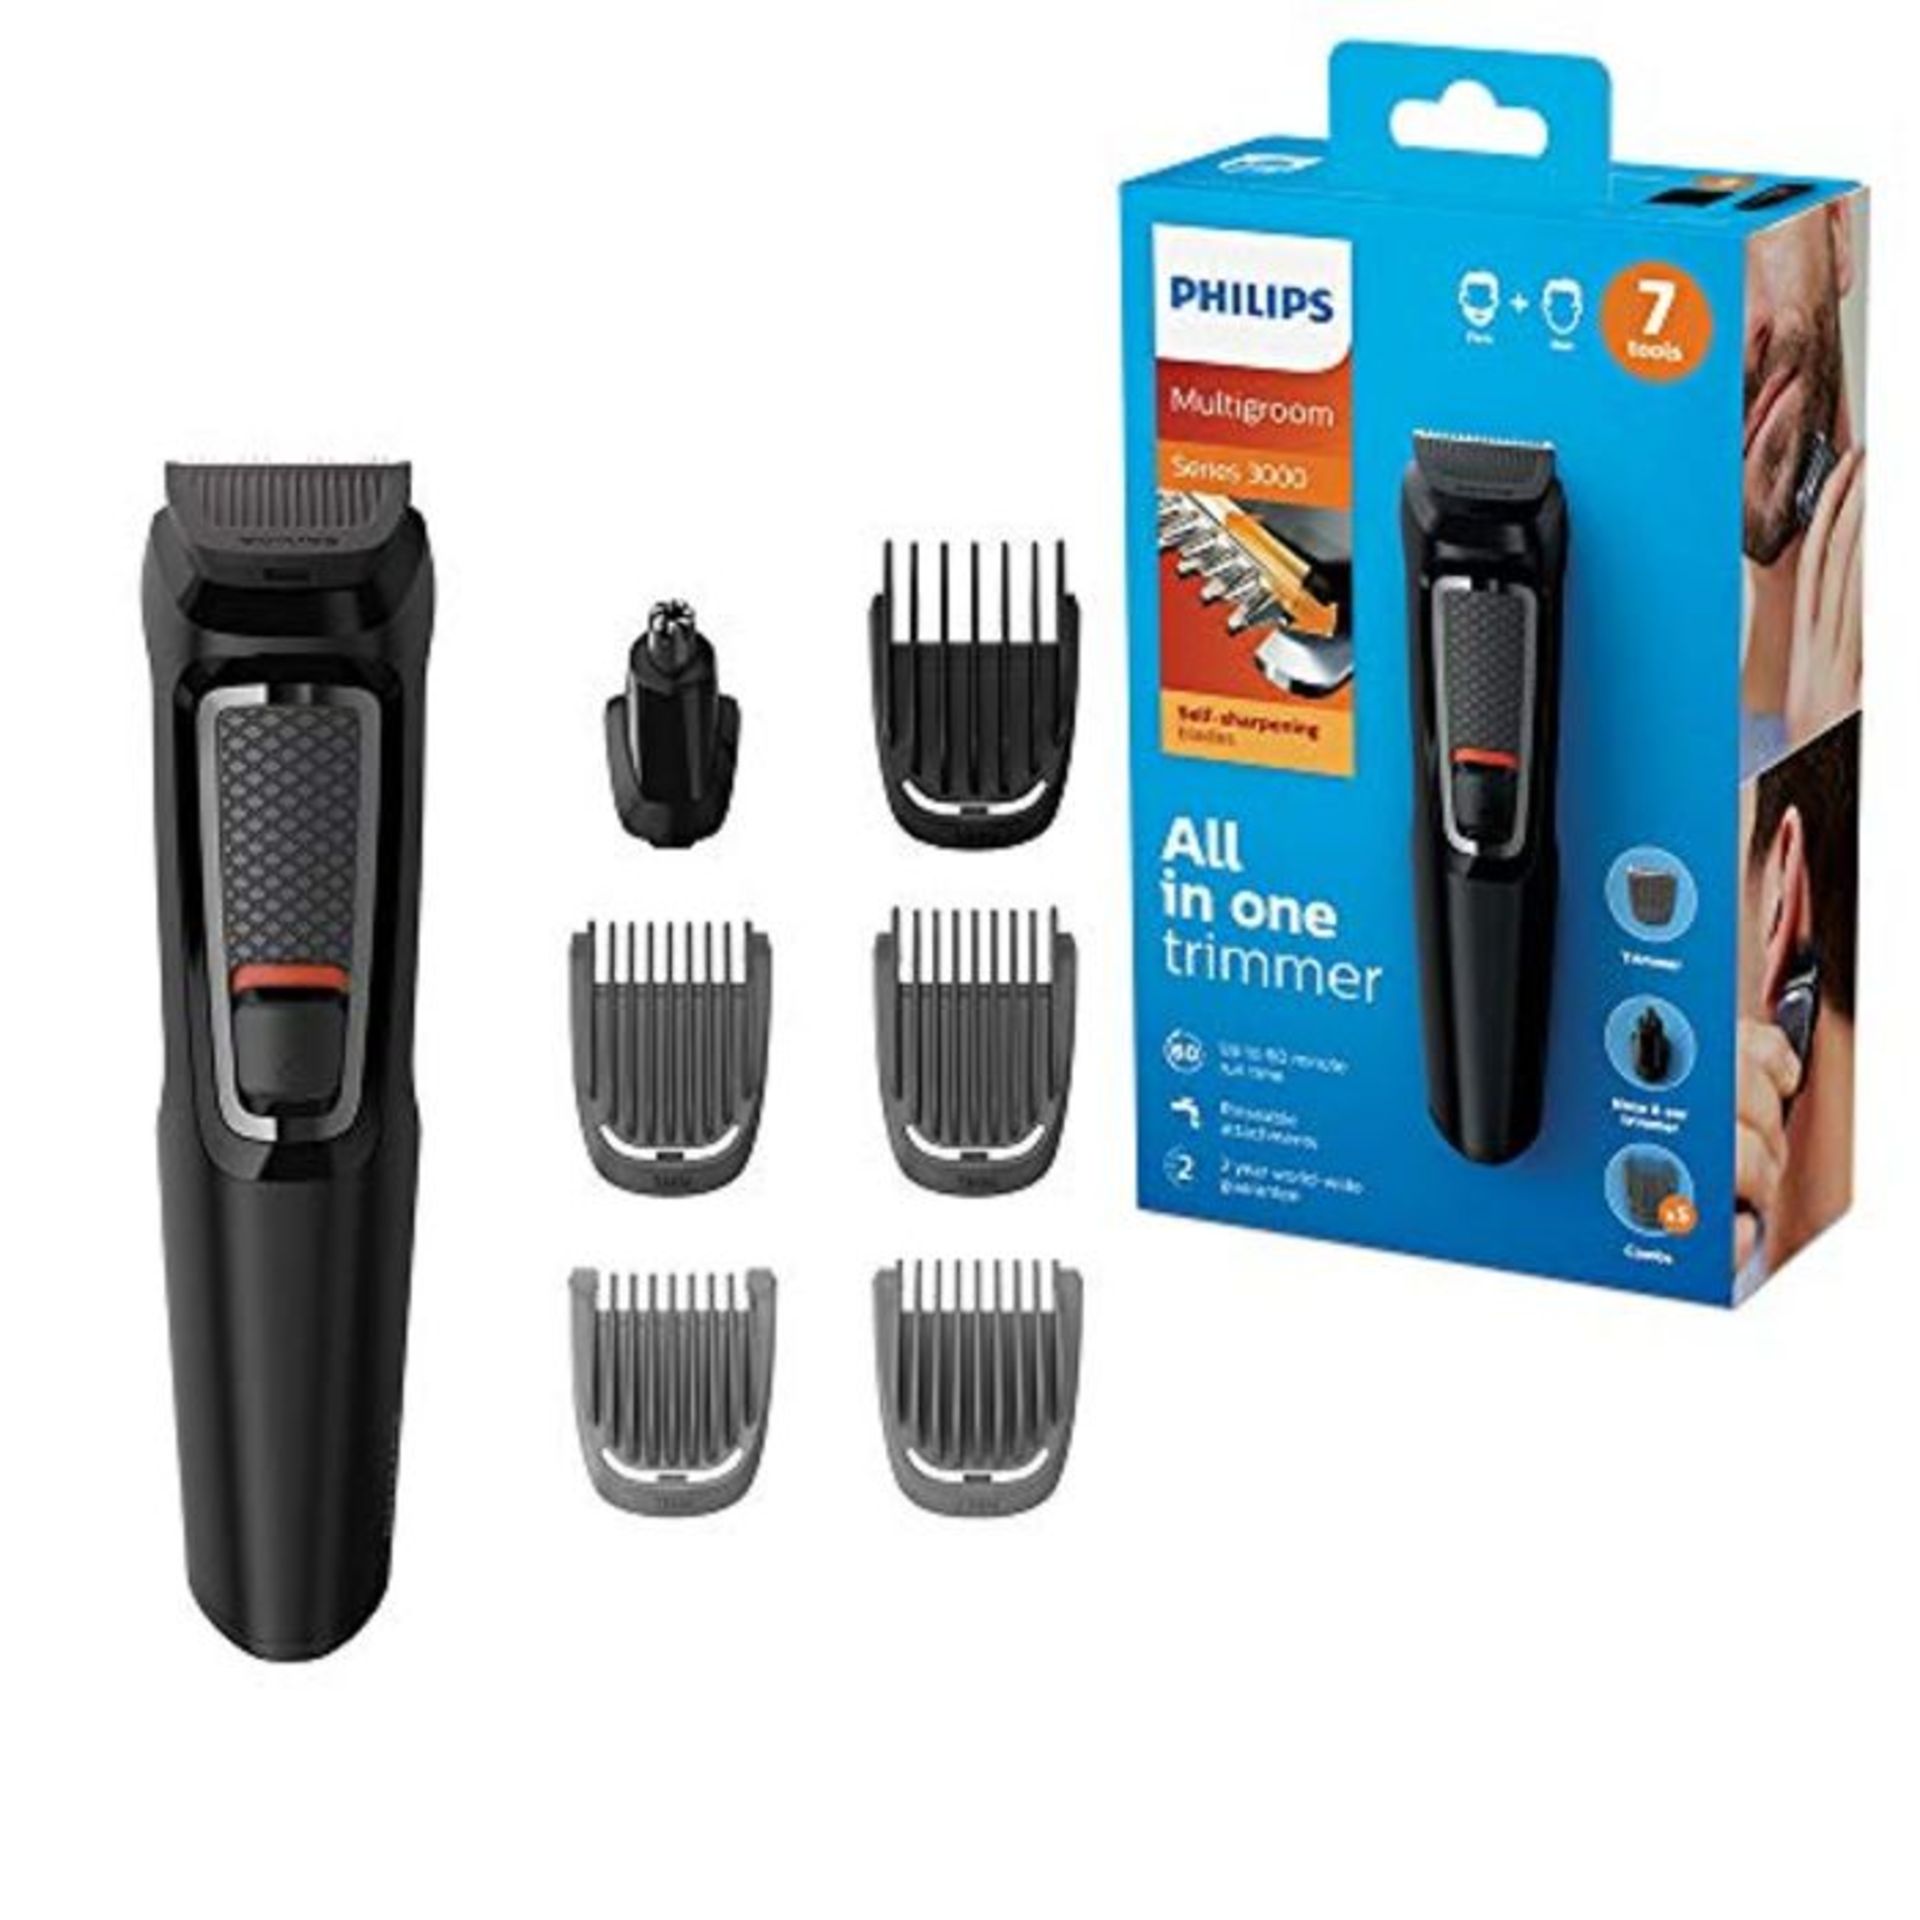 Philips 7-in-1 All-In-One Trimmer, Series 3000 Grooming Kit for Beard & Hair with 7 At